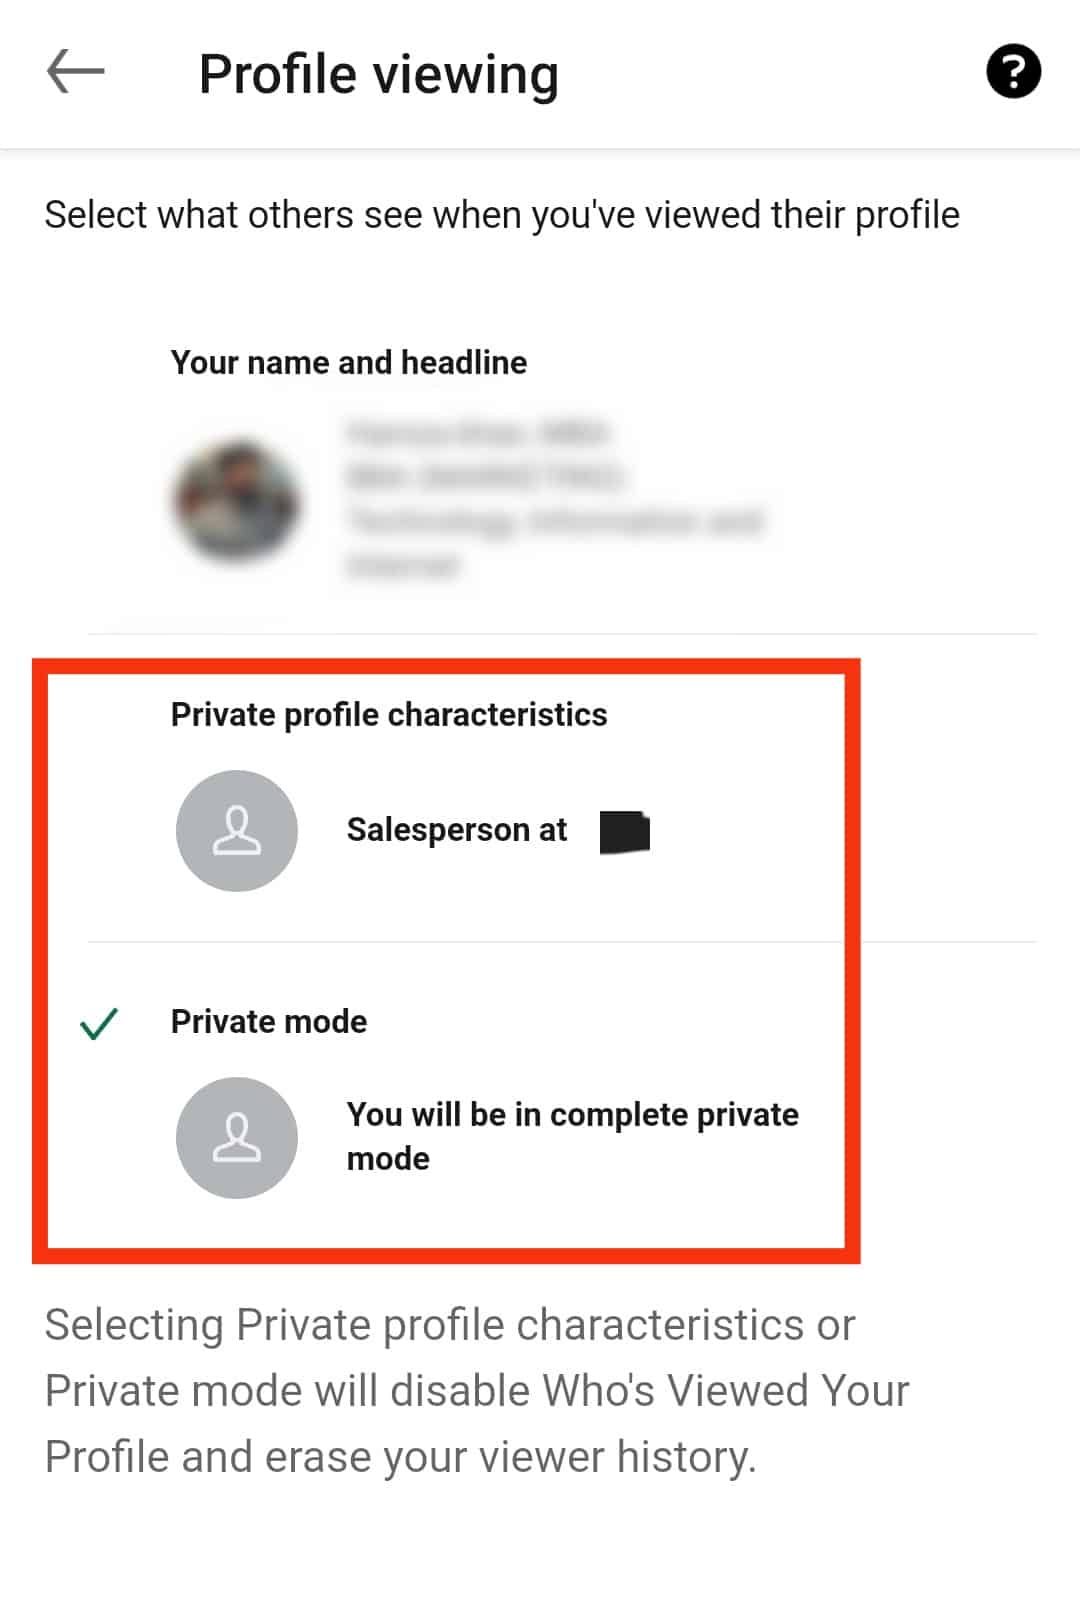 Choose Between Private Profile Characteristics Or Private Mode